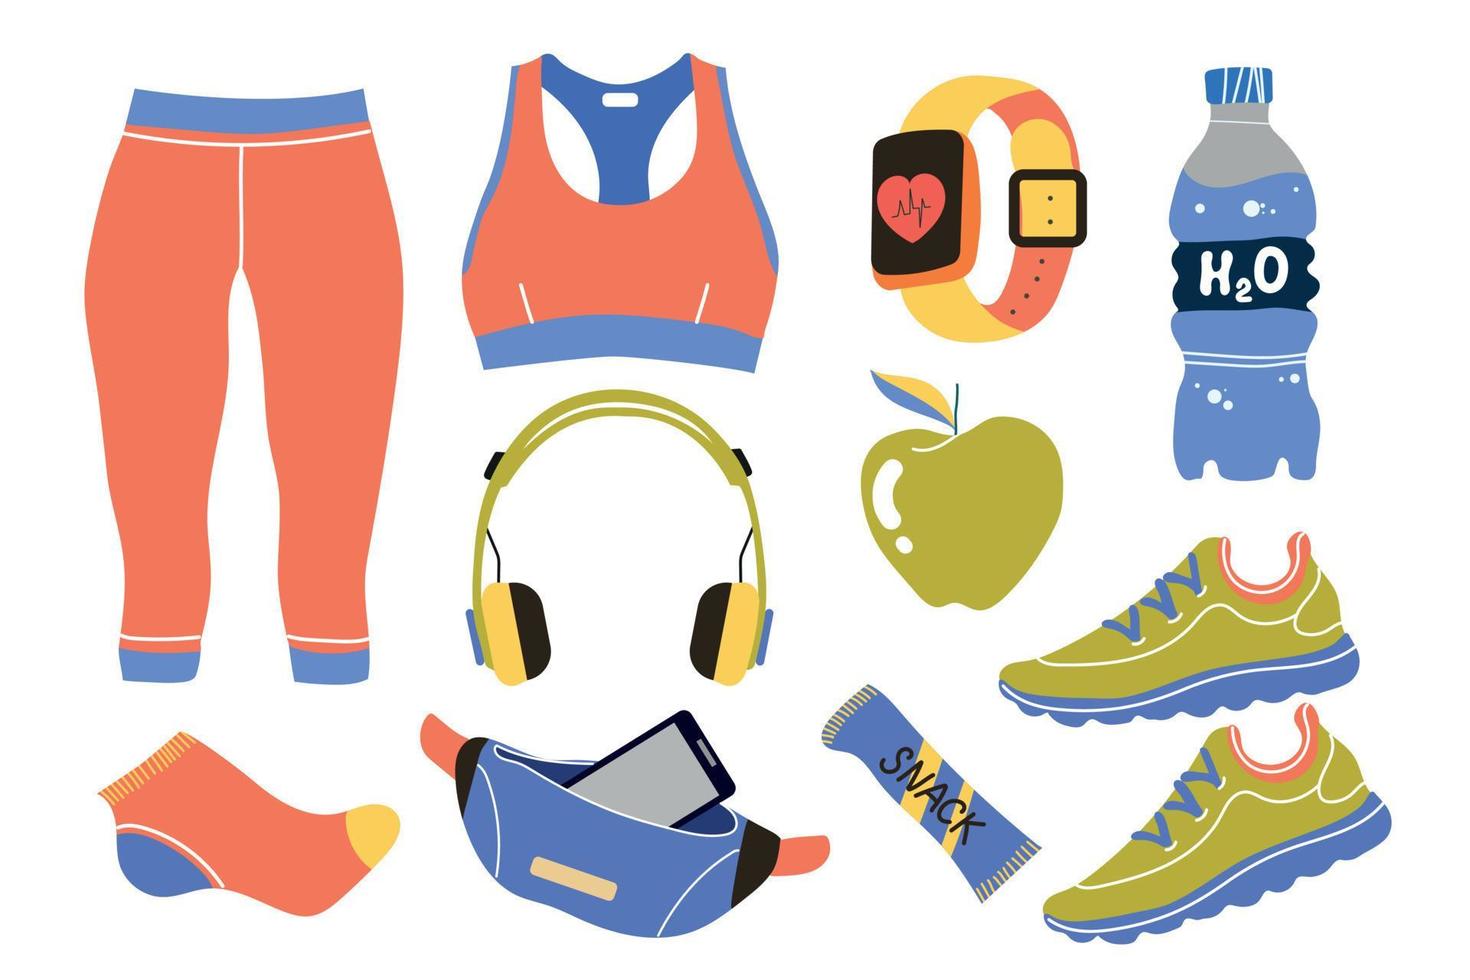 Running Gear For Women. Running Accessories for Female. Fitness Set. Sport Clothes, Sport Watch, Running Shoes vector